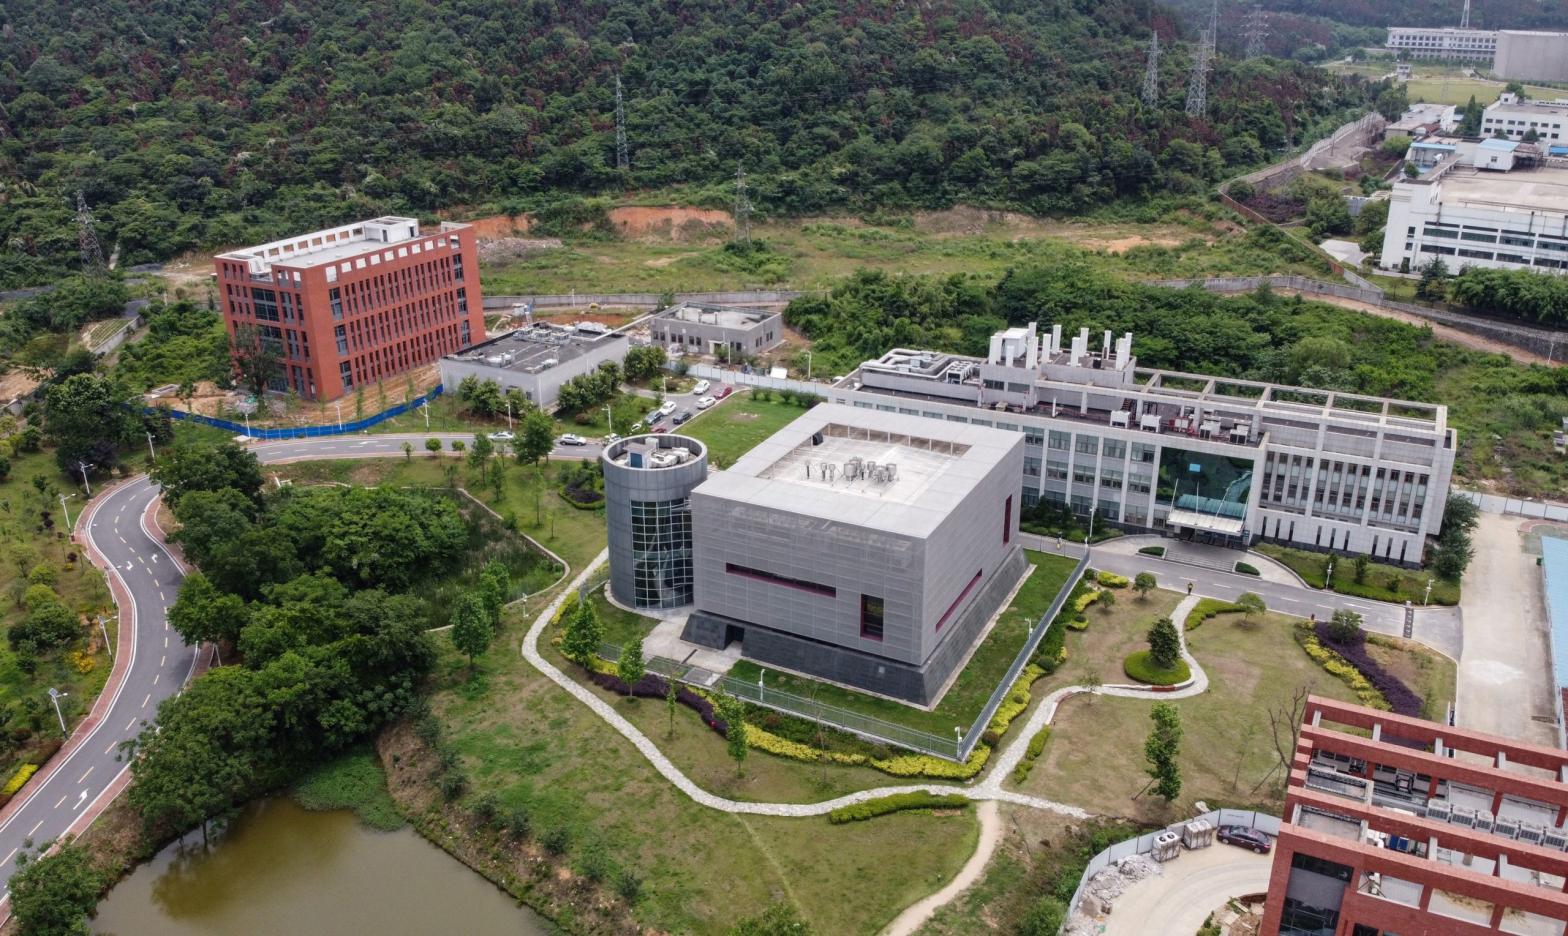 The P4 laboratory (centre) on the campus of the Wuhan Institute of Virology in Wuhan in China's central Hubei province on May 13, 2020.  (Photo: Hector Retamal / AFP, Getty Images)